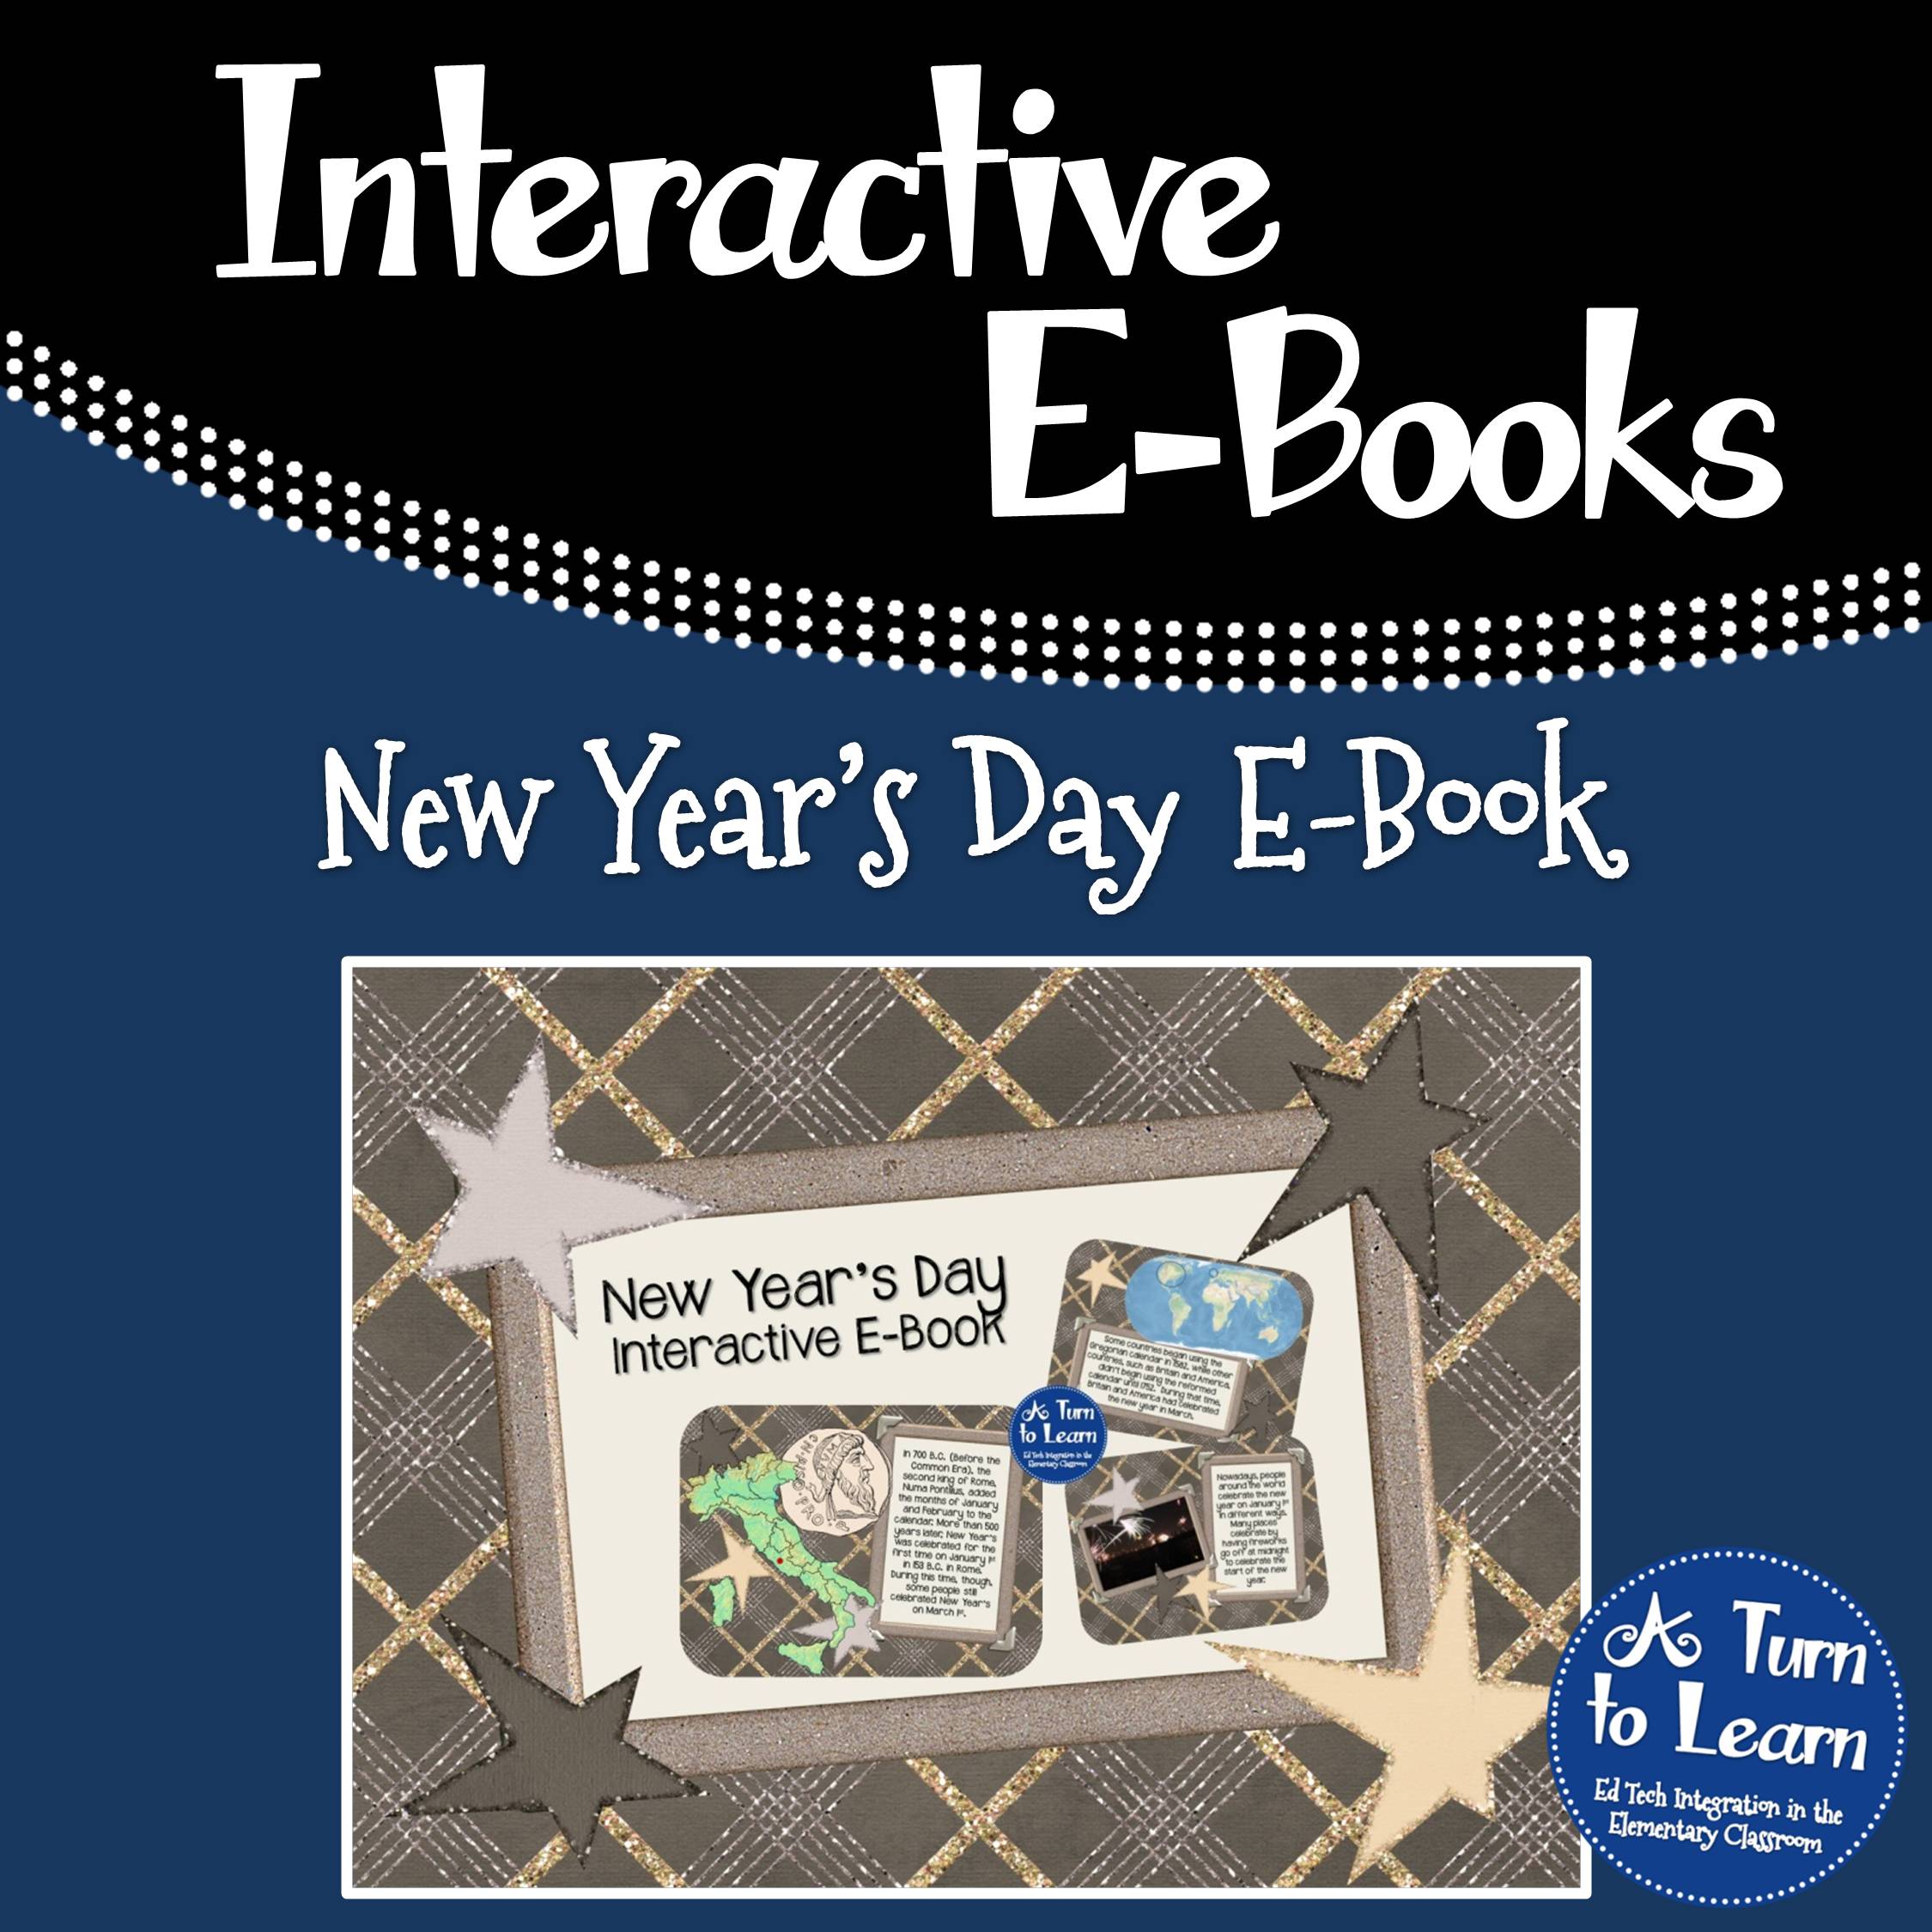 New Year's Day Interactive E-Book: This Smartboard activity has comprehension activities to keep students engaged!